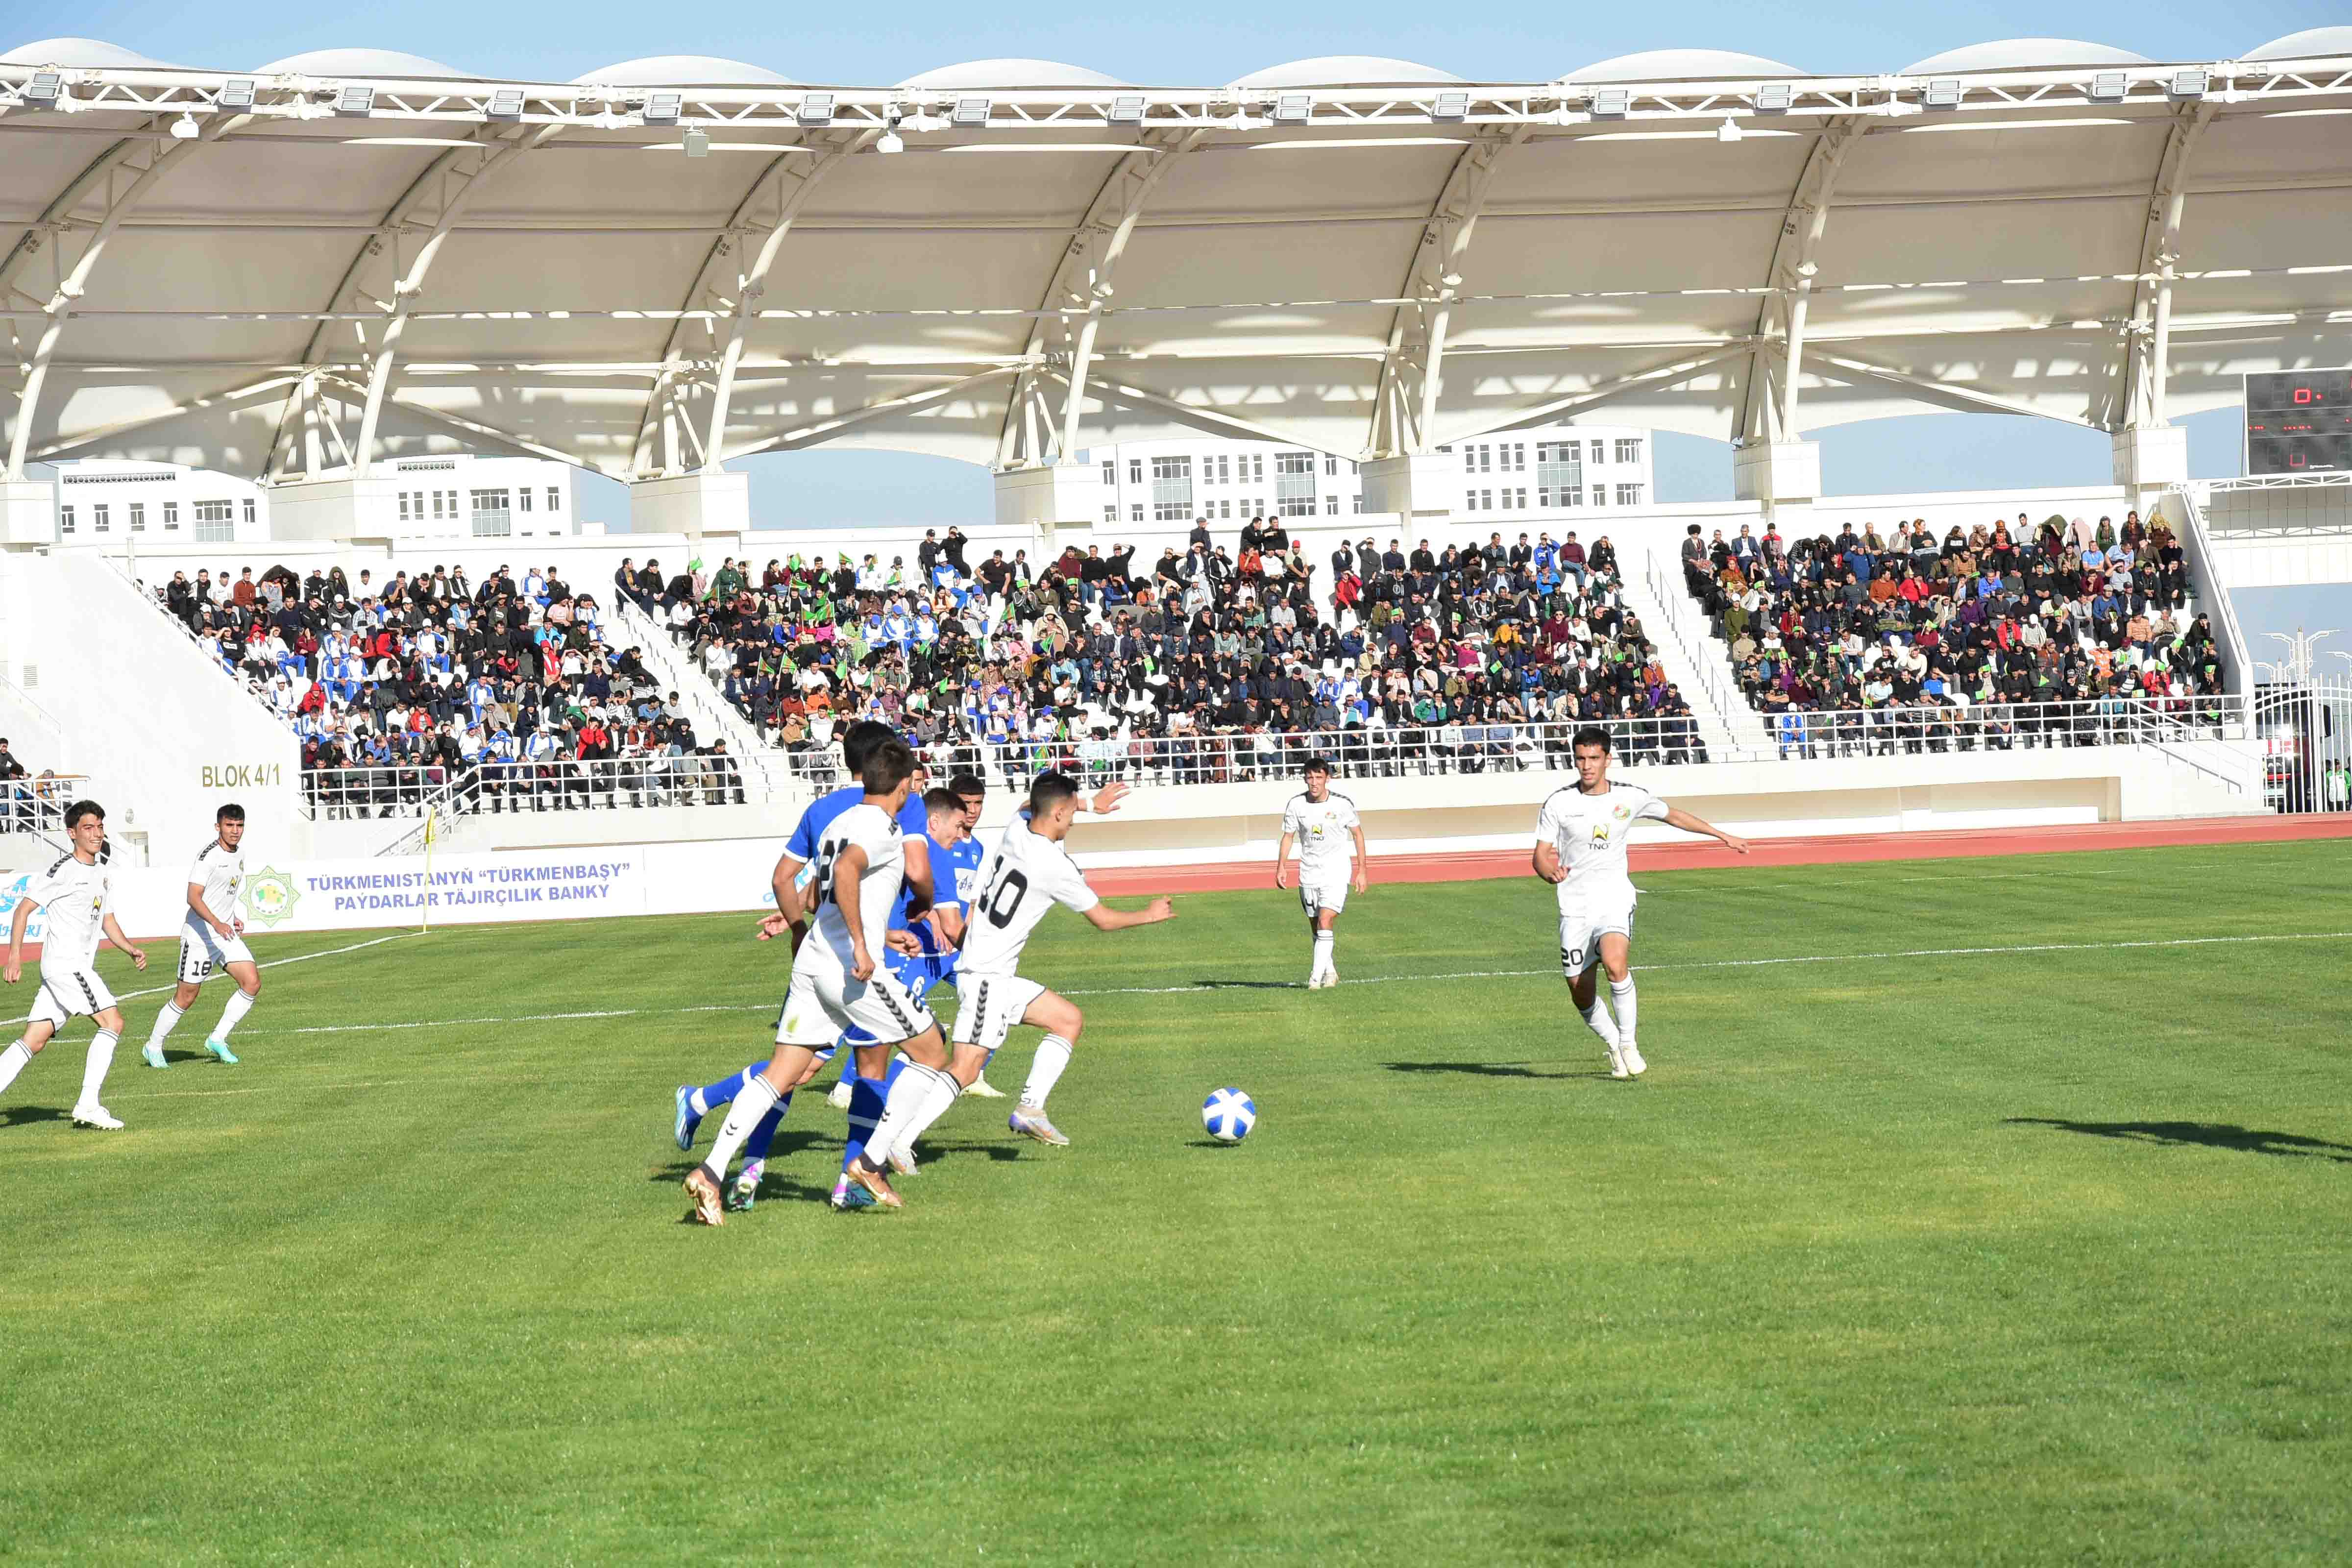 The second round of the Turkmenistan Football Championship started